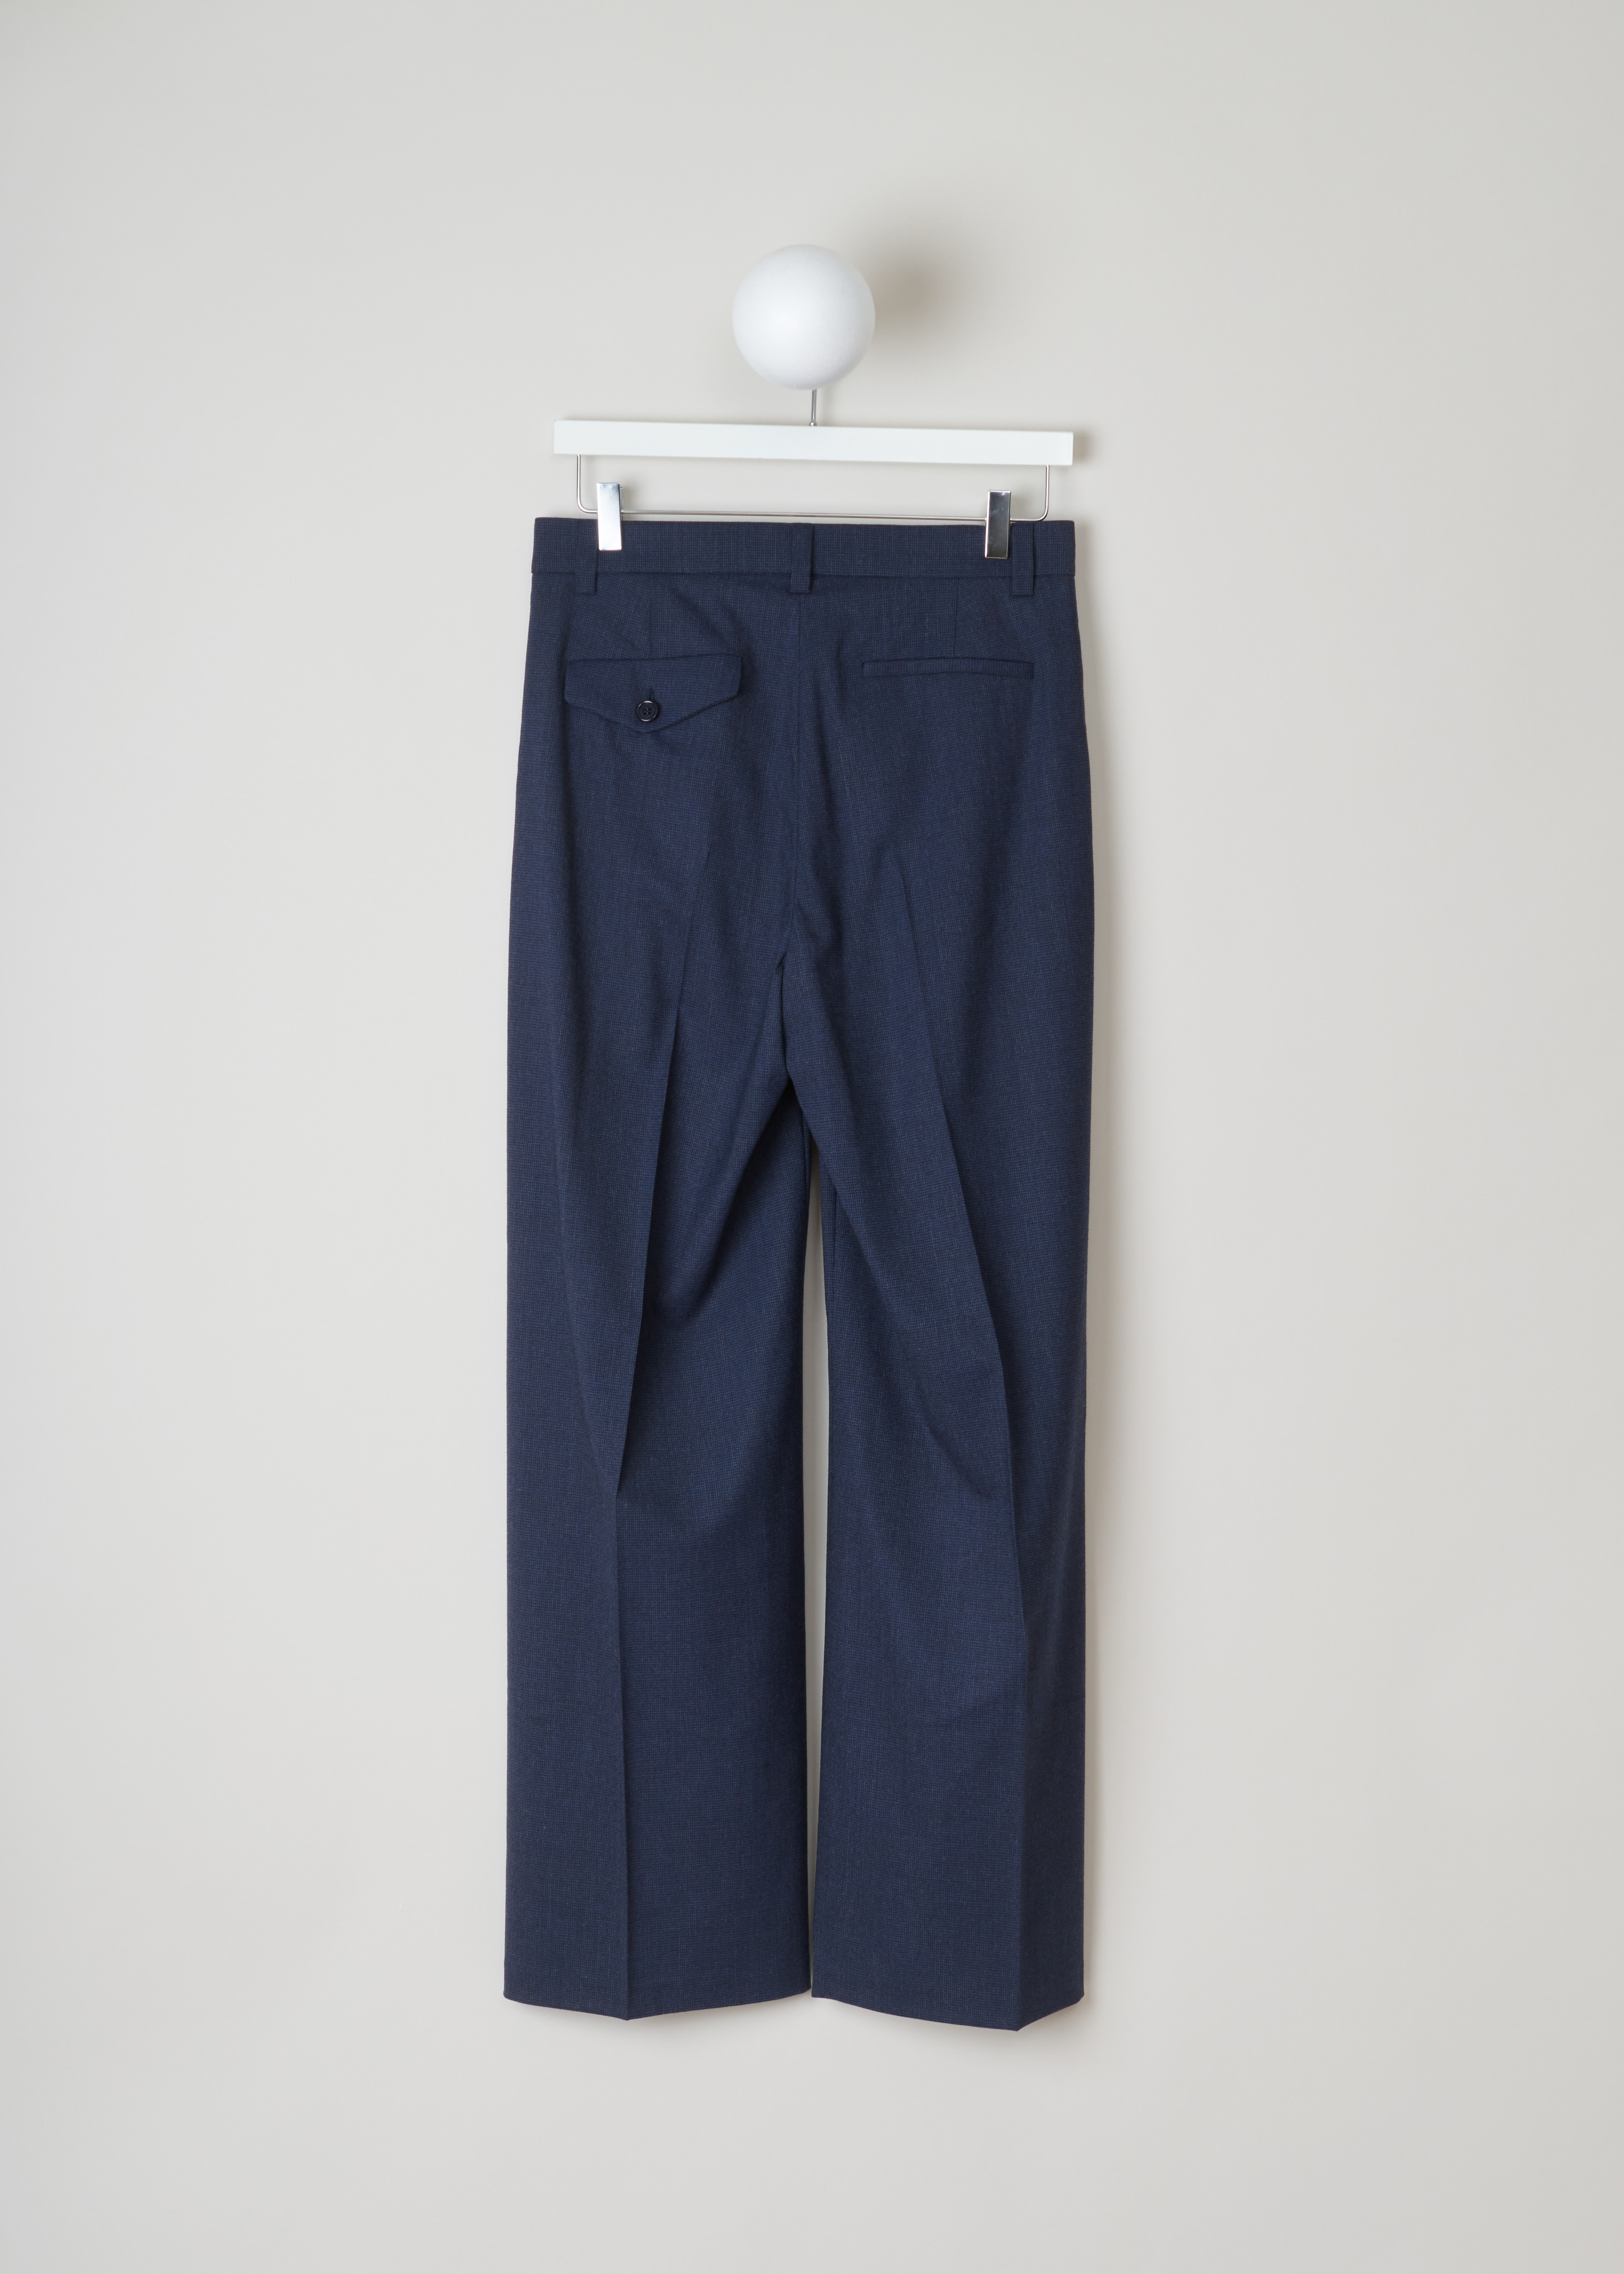 Aspesi Loose navy trousers I9G_0107_G841_40096 navy blue back. Wide legged trousers with centre creases, a waistband with belt loops and pleats, side pockets and welt pockets on the back.